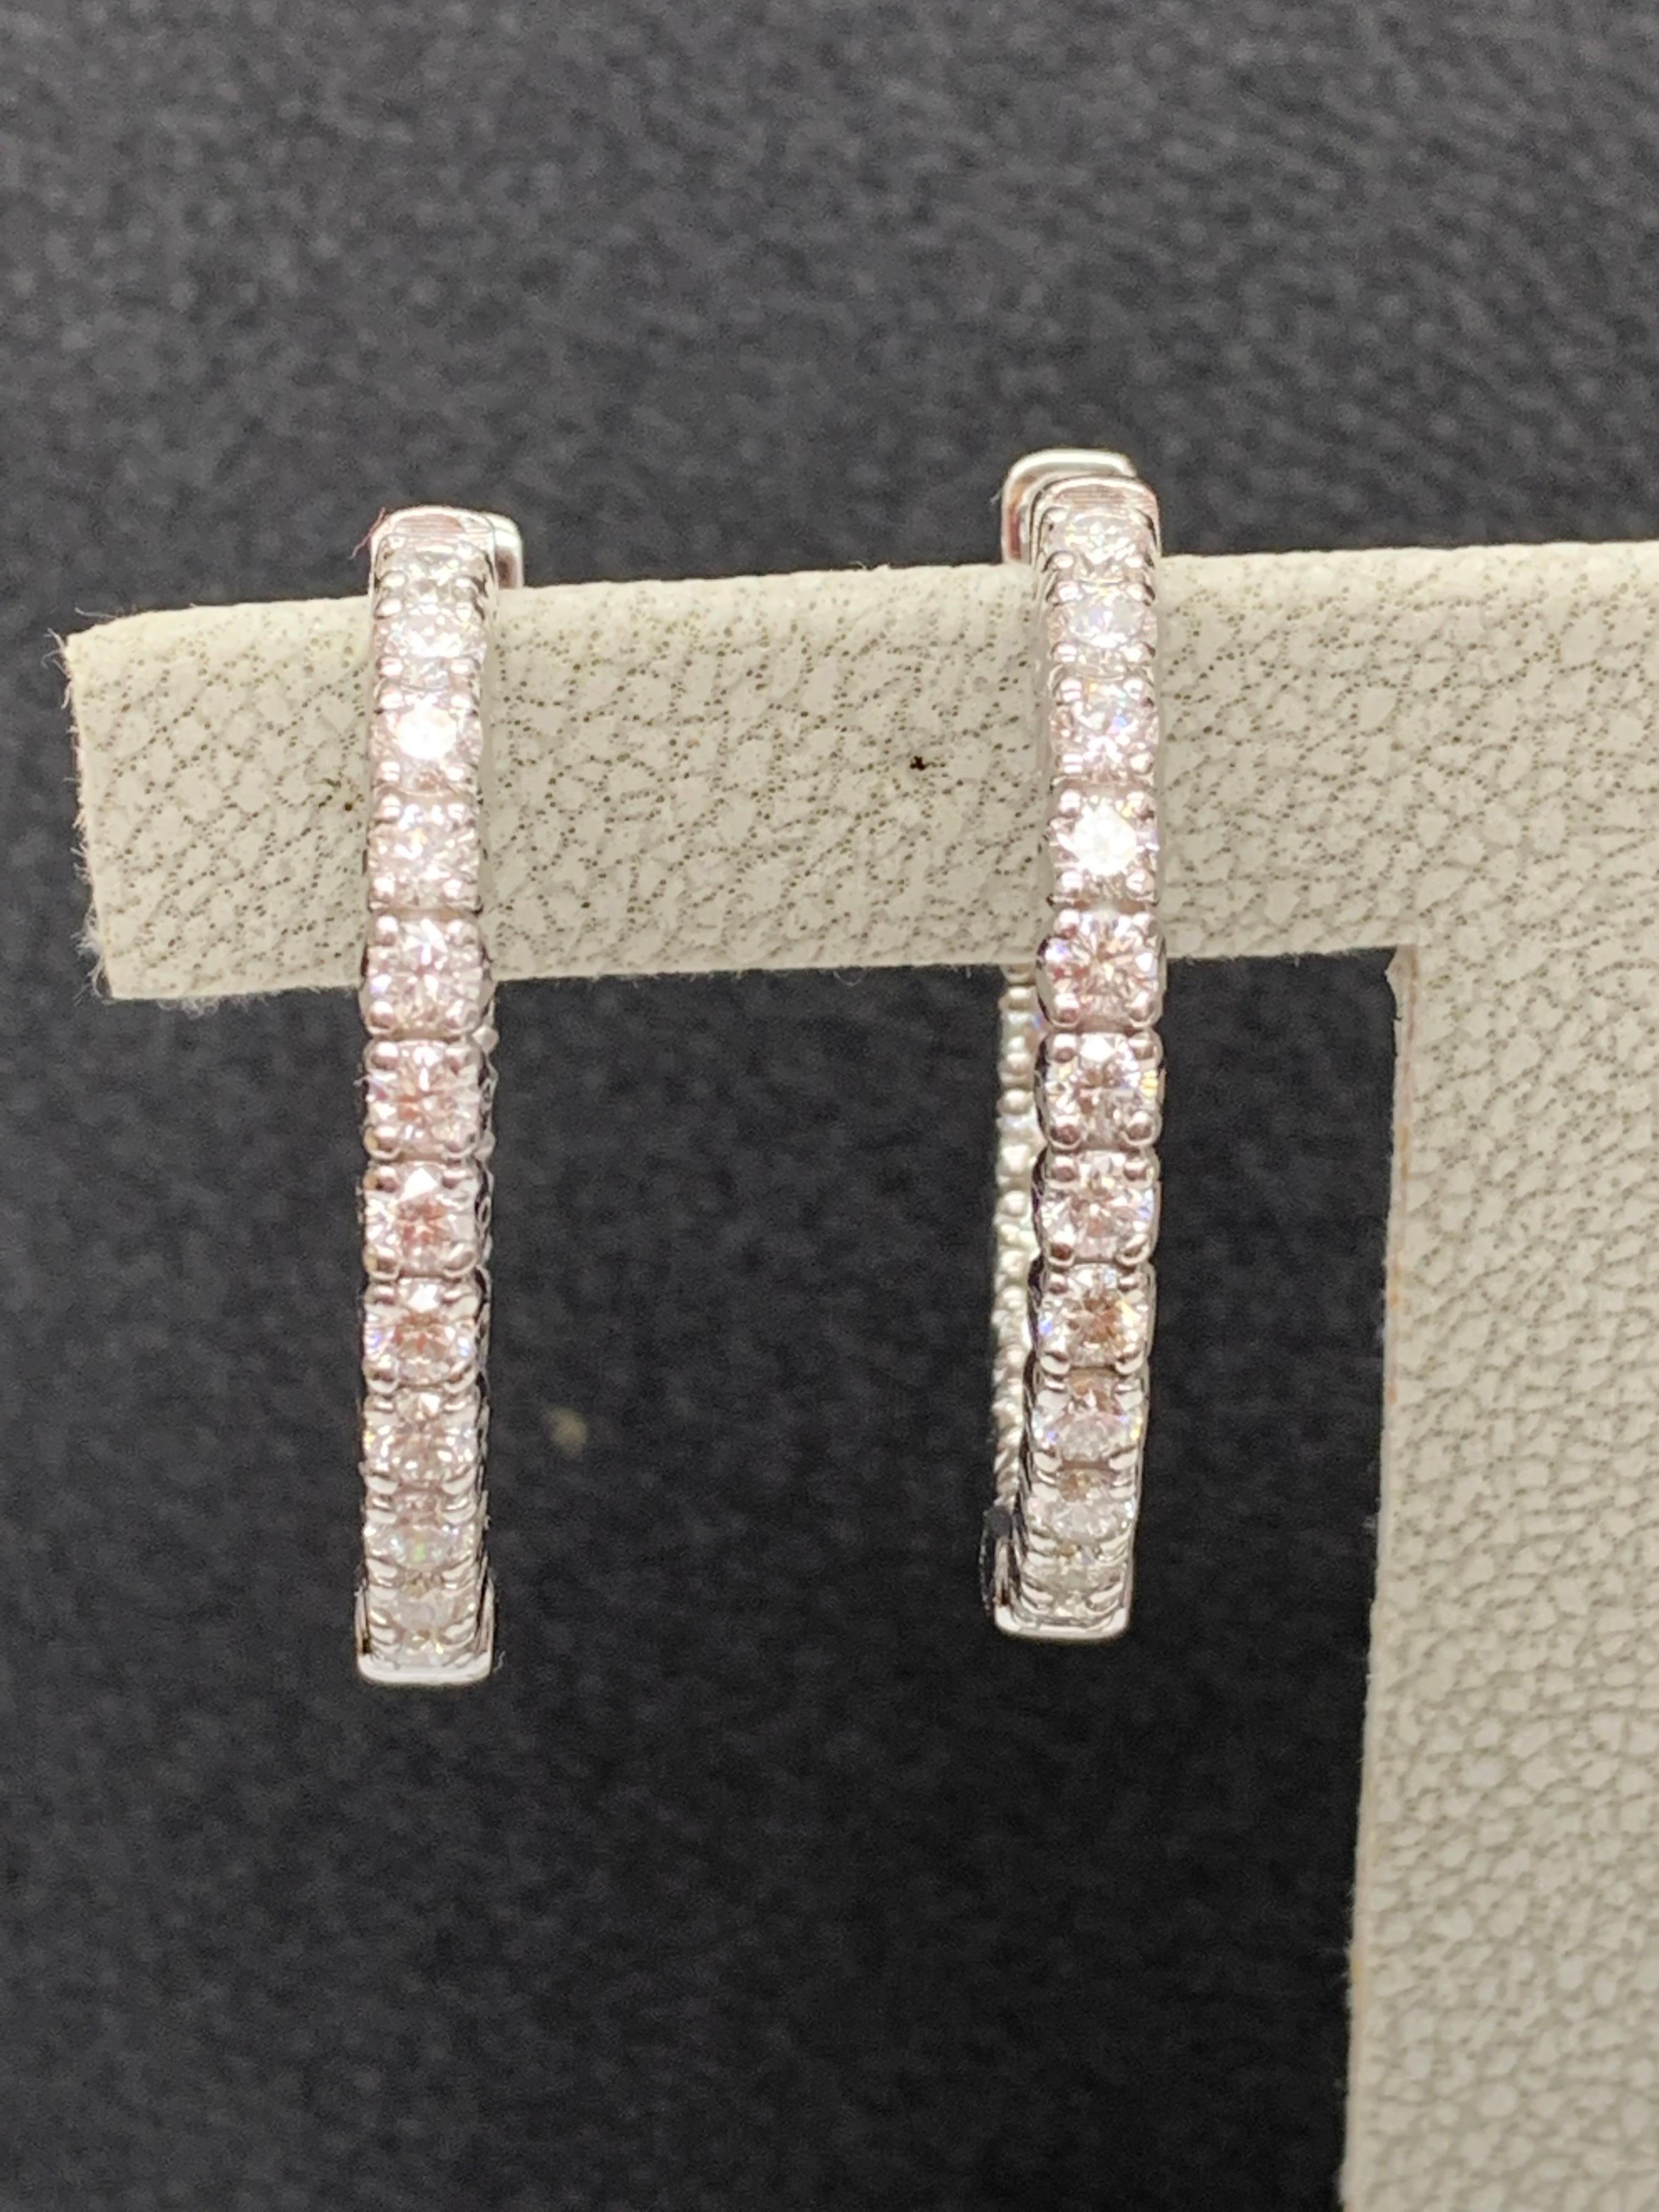 A chic and fashionable pair of hoop earrings showcasing round diamonds, set in 14k white gold.  40 Round diamonds weigh 2 carats in total. A beautiful piece of jewelry.
All diamonds are GH color SI1 Clarity.
Style is available in different price